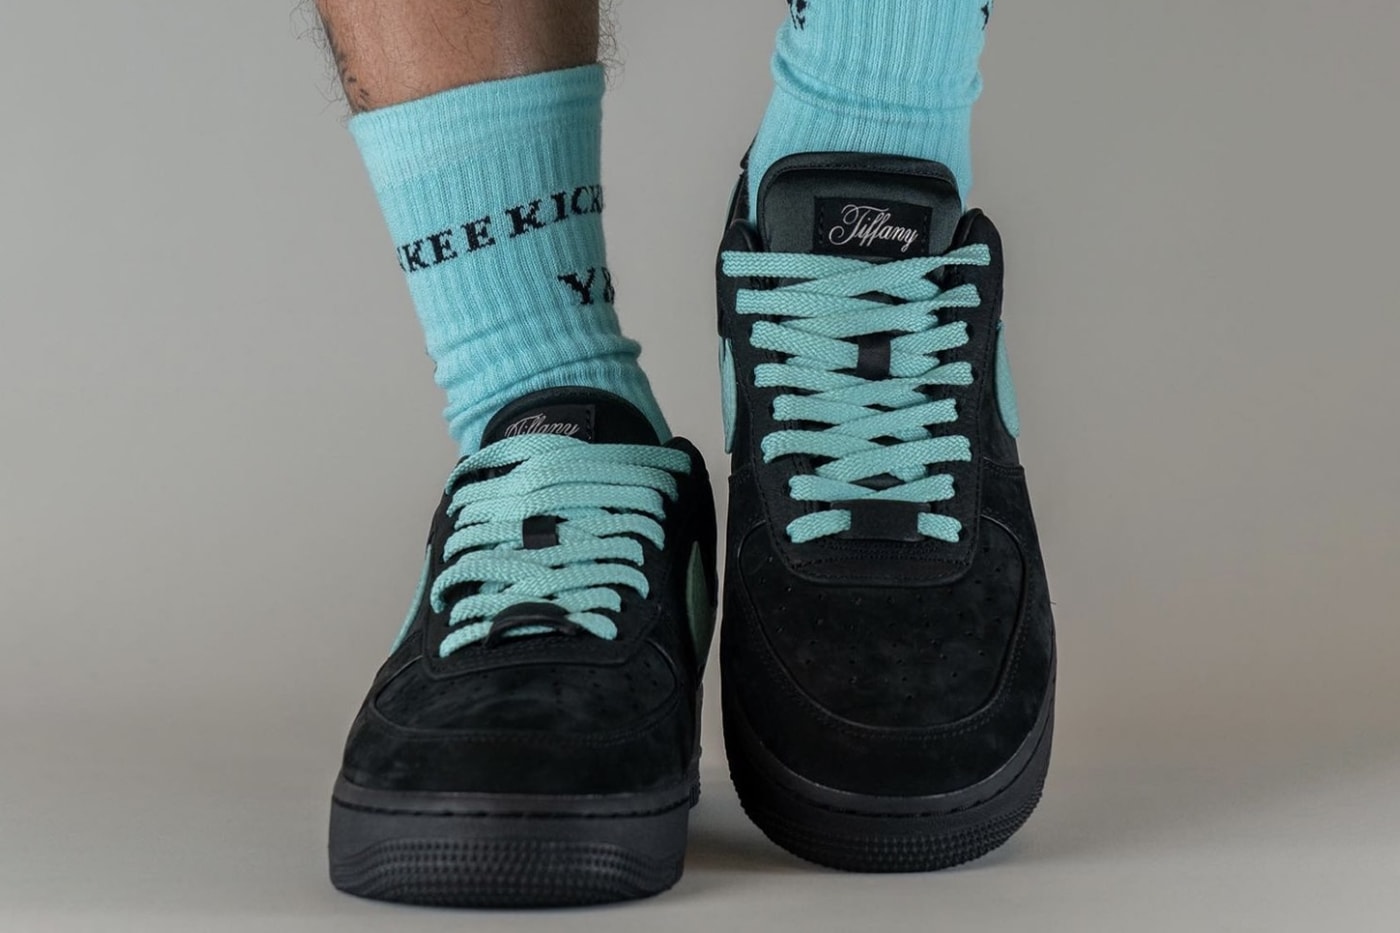 Take an On-Feet Look at the Tiffany & Co. x Nike Air Force 1 Low Collaboration DZ1382-001 black tiffany blue af1 swoosh suede leather lebron james 